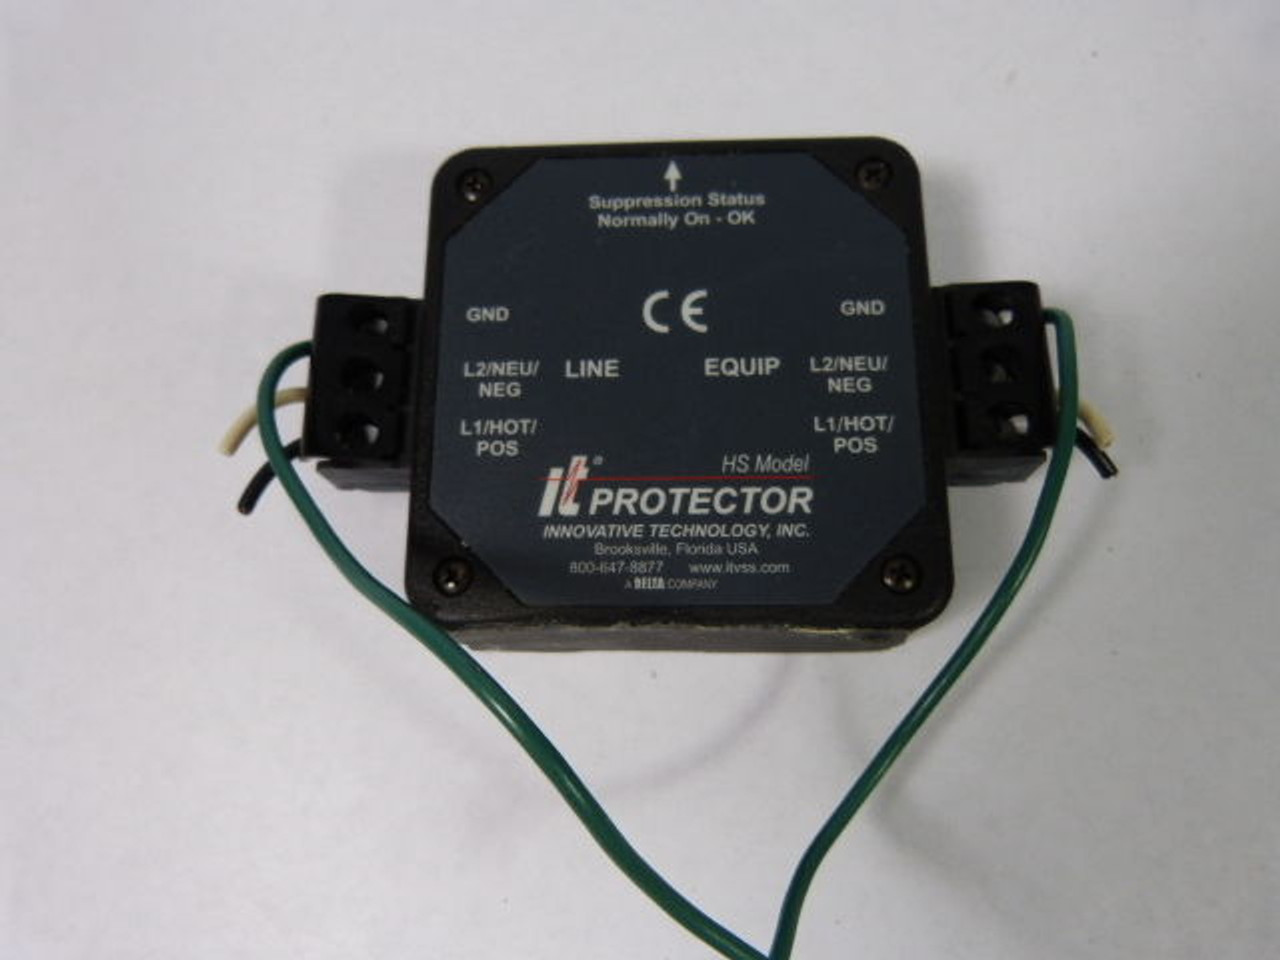 The IT Protector HS Model 400-1400 Surge Protector USED